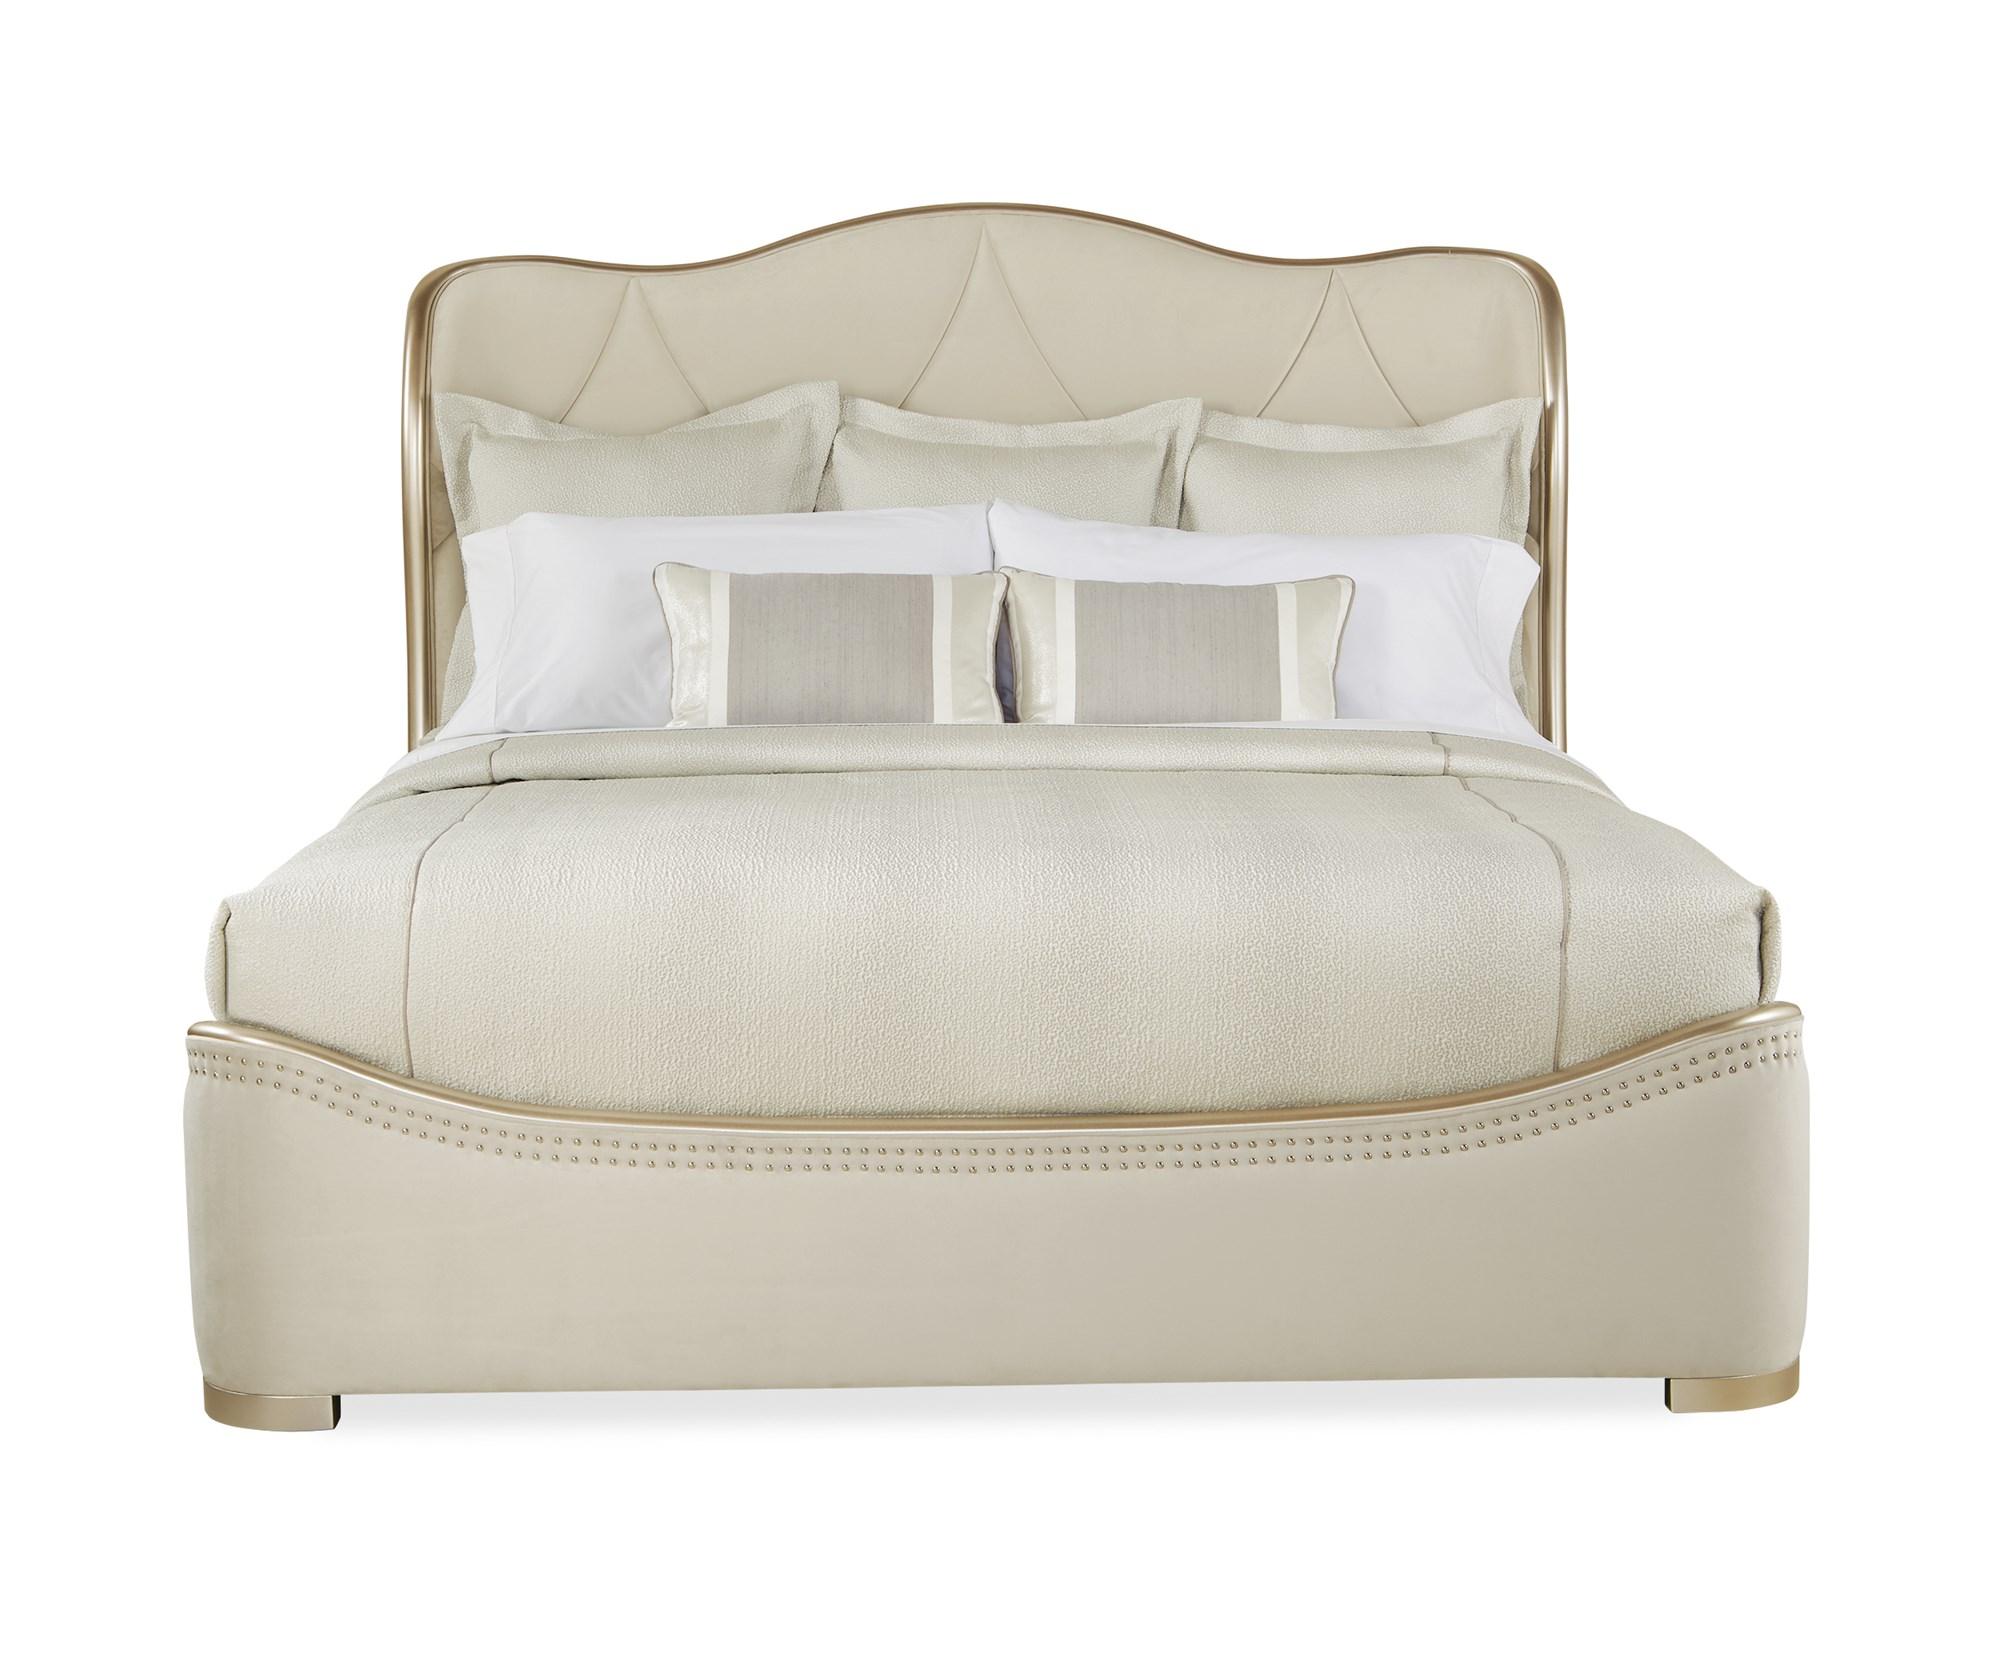 

    
Curvaceous Headboard Creamy Velvet Sleigh ADELA CAL KING BED by Caracole
